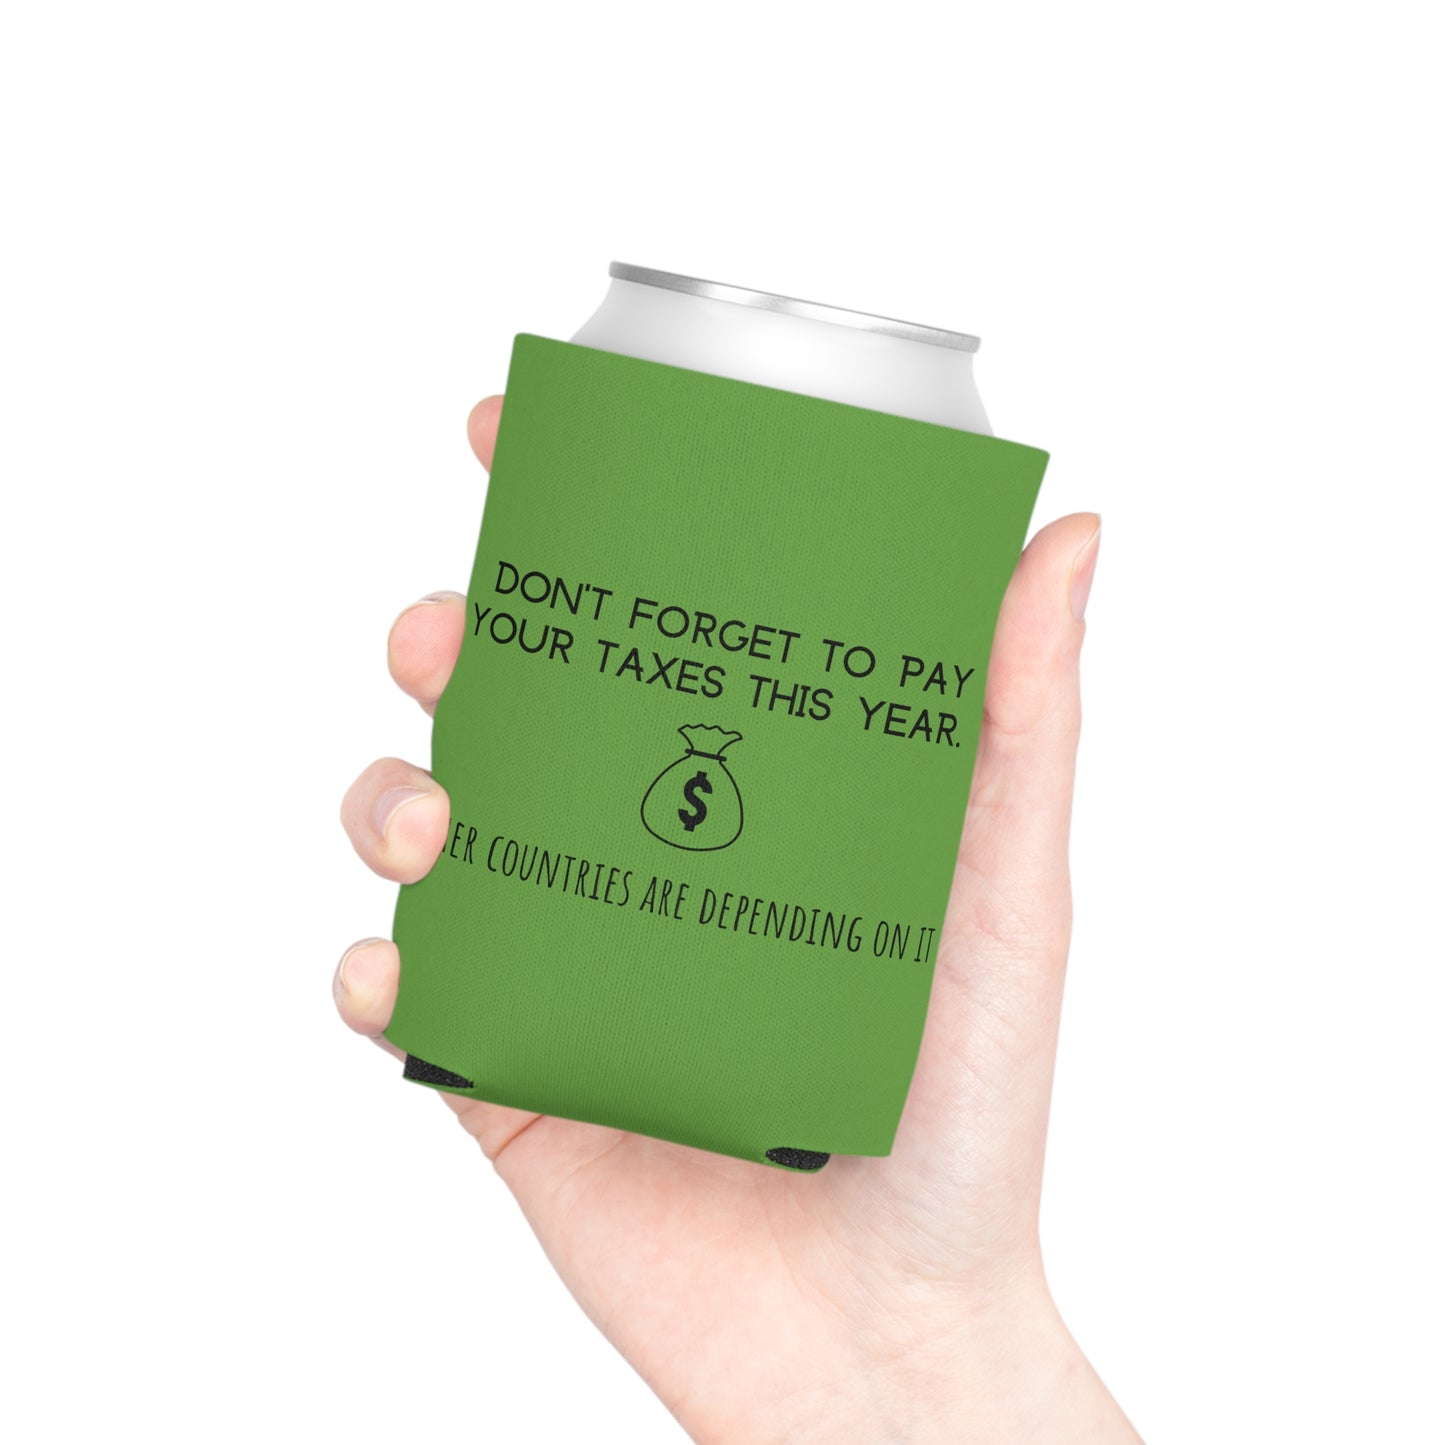 "Don't Forget To Pay Your Taxes" Can Cooler - Weave Got Gifts - Unique Gifts You Won’t Find Anywhere Else!